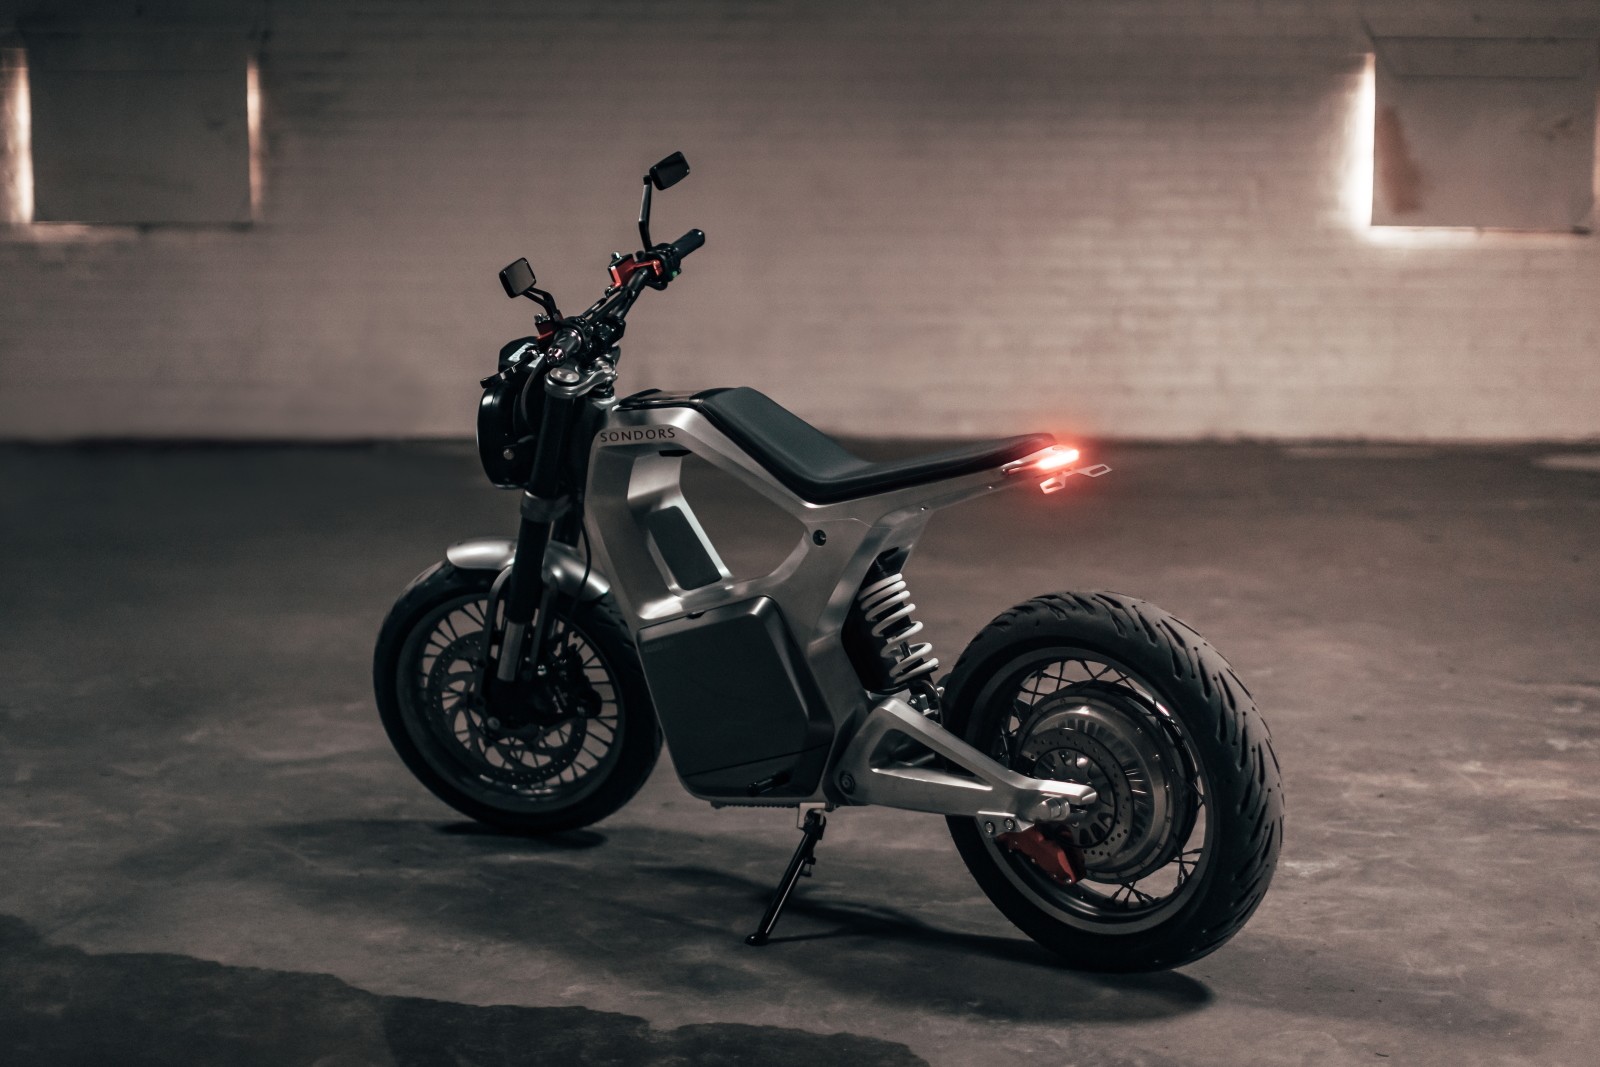 Metacycle Is Sondors’ First Electric Motorcycle, Gorgeous, Affordable - autoevolution